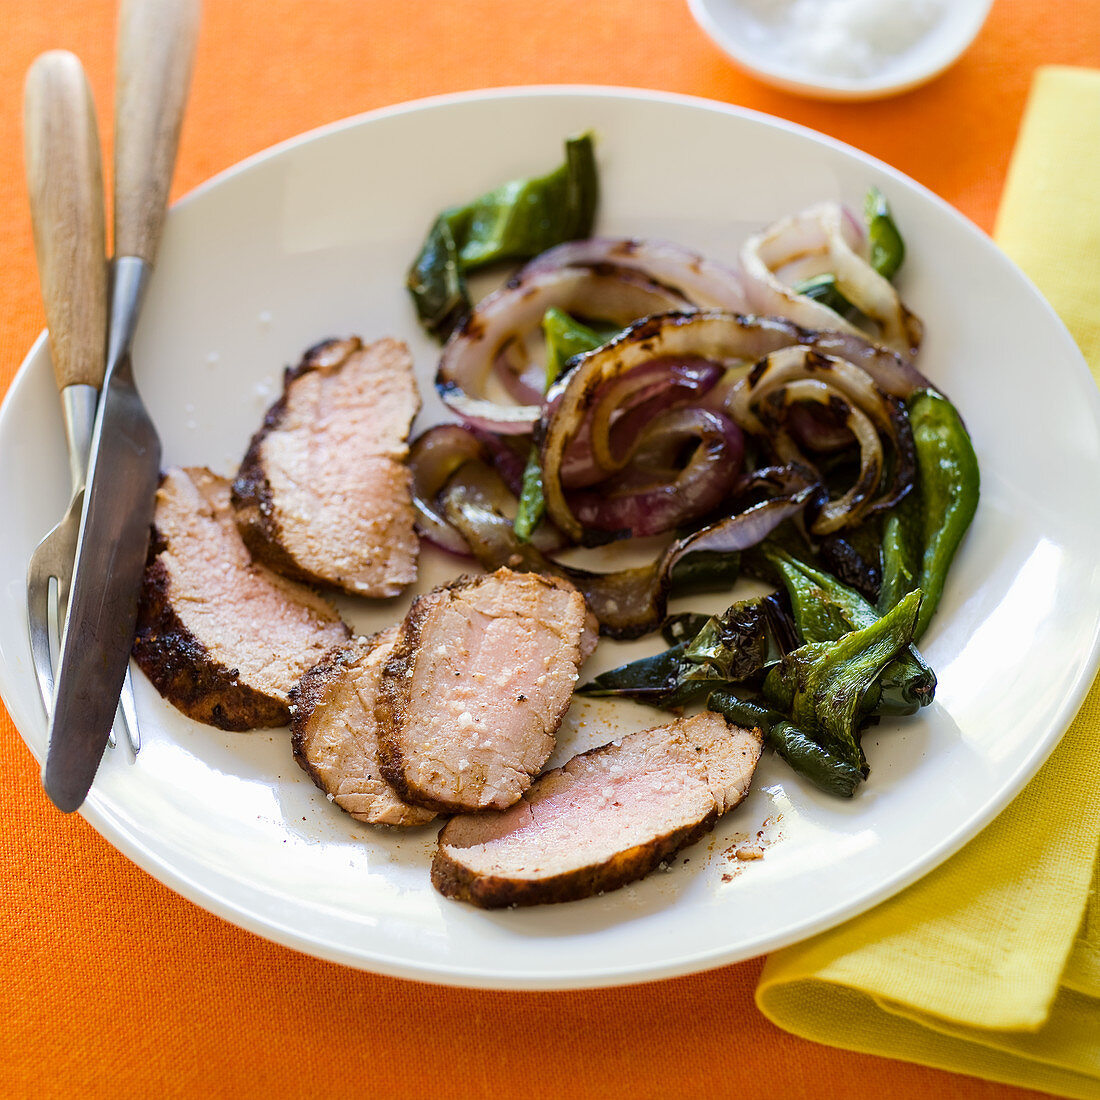 Sliced pork tenderloin with onions and greens